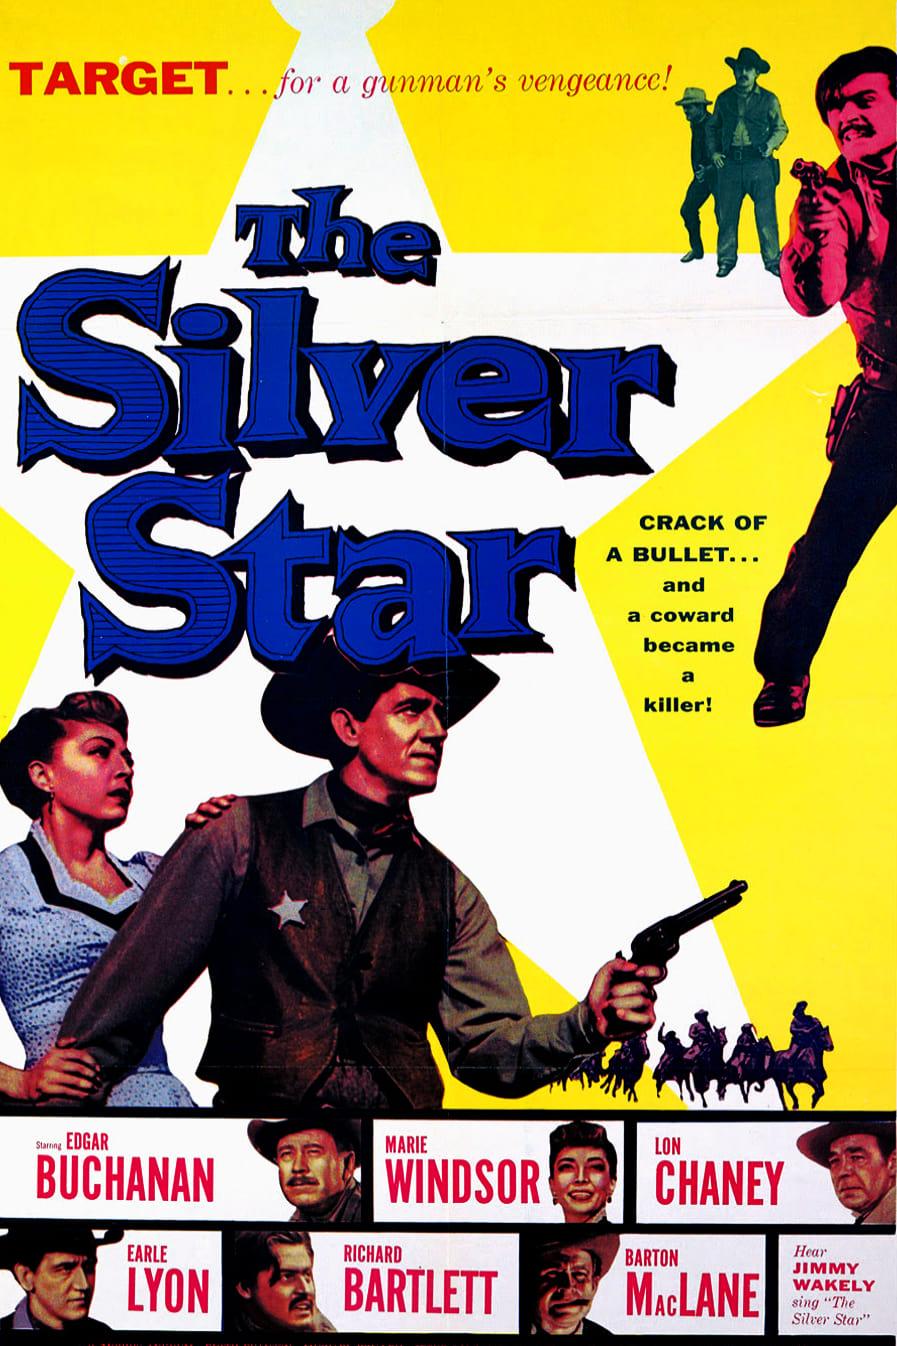 The Silver Star poster